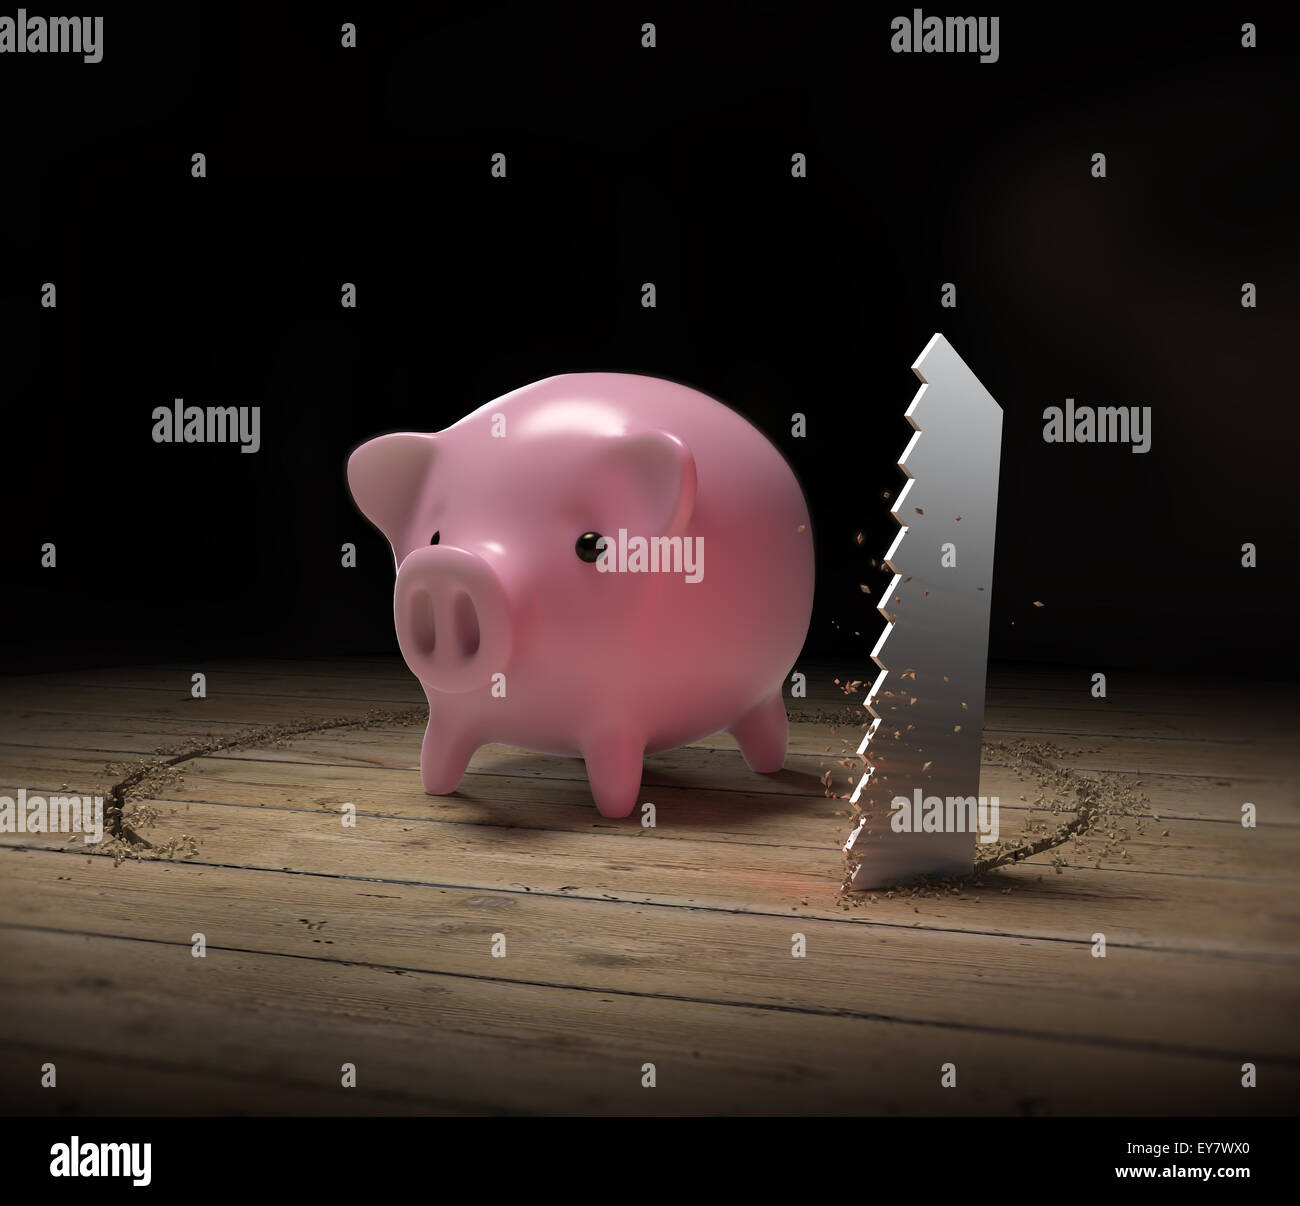 Cartoon style piggy bank robbery Banque D'Images